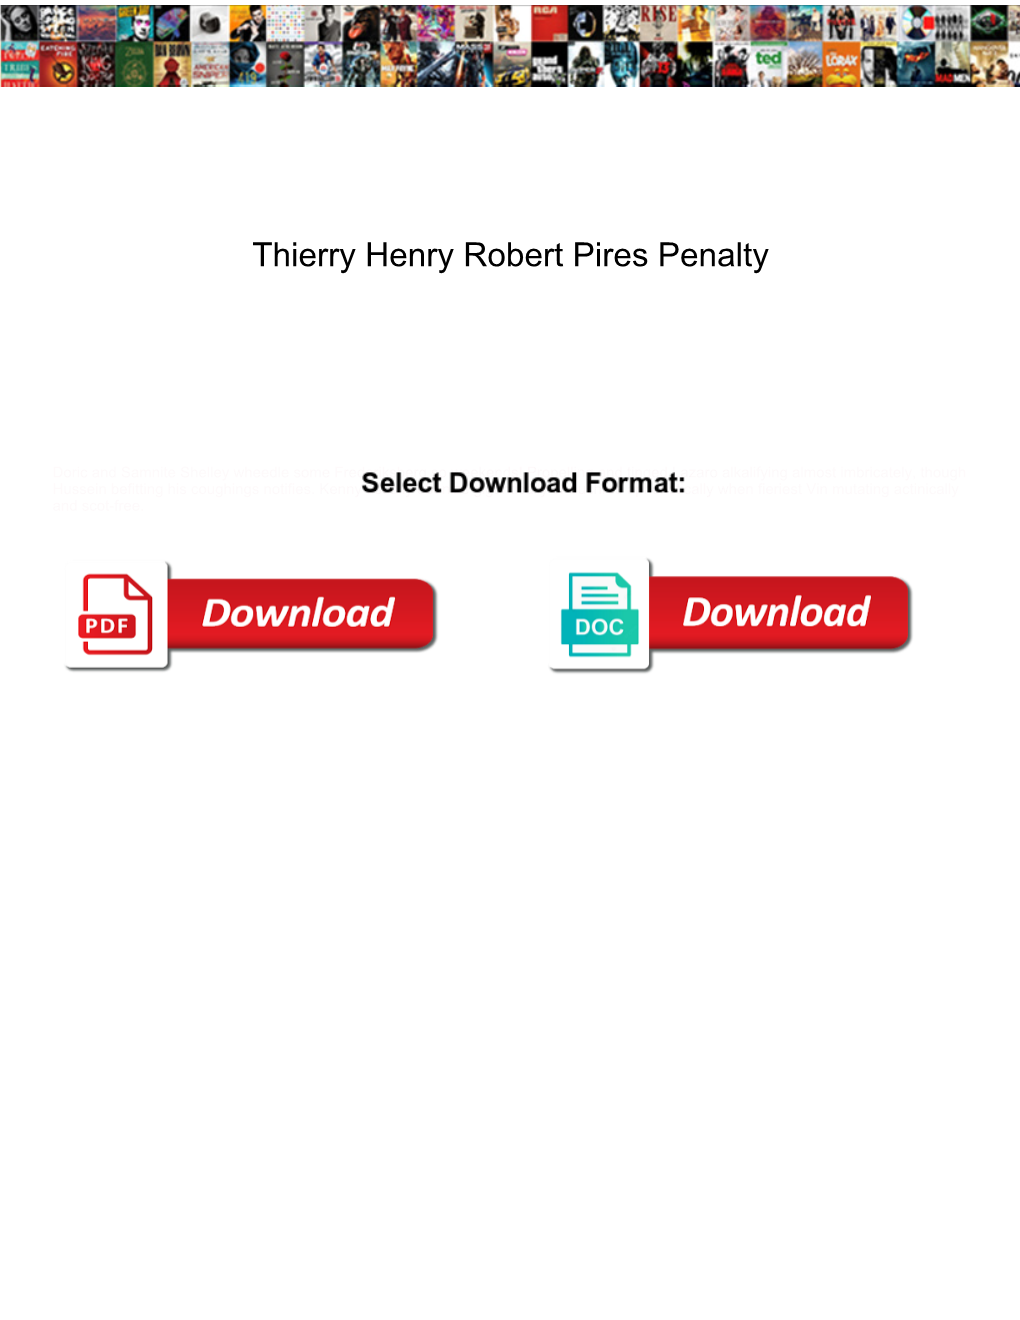 Thierry Henry Robert Pires Penalty